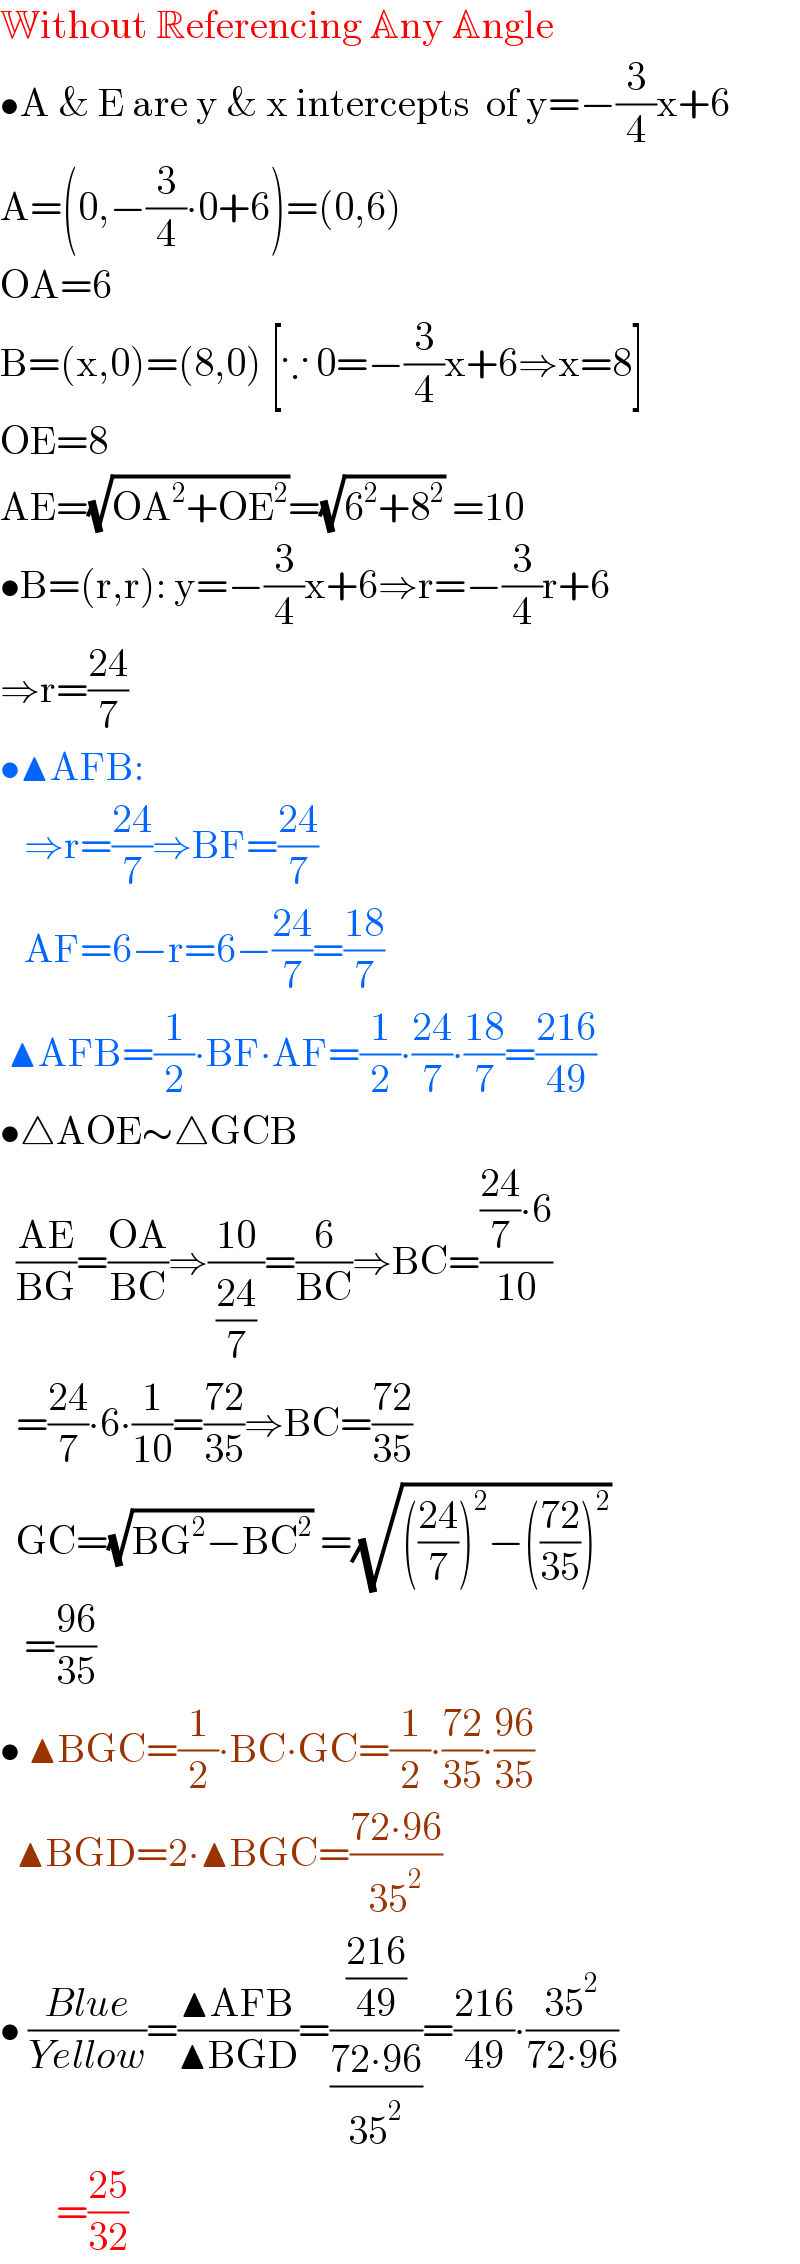 Without Referencing Any Angle  •A & E are y & x intercepts  of y=−(3/4)x+6  A=(0,−(3/4)∙0+6)=(0,6)  OA=6  B=(x,0)=(8,0) [∵ 0=−(3/4)x+6⇒x=8]  OE=8  AE=(√(OA^2 +OE^2 ))=(√(6^2 +8^2 )) =10  •B=(r,r): y=−(3/4)x+6⇒r=−(3/4)r+6  ⇒r=((24)/7)  •▲AFB:     ⇒r=((24)/7)⇒BF=((24)/7)     AF=6−r=6−((24)/7)=((18)/7)   ▲AFB=(1/2)∙BF∙AF=(1/2)∙((24)/7)∙((18)/7)=((216)/(49))  •△AOE∼△GCB    ((AE)/(BG))=((OA)/(BC))⇒((10)/( ((24)/7) ))=(6/(BC))⇒BC=((((24)/7)∙6)/(10))    =((24)/7)∙6∙(1/(10))=((72)/(35))⇒BC=((72)/(35))    GC=(√(BG^2 −BC^2 )) =(√((((24)/7))^2 −(((72)/(35)))^2 ))      =((96)/(35))  • ▲BGC=(1/2)∙BC∙GC=(1/2)∙((72)/(35))∙((96)/(35))    ▲BGD=2∙▲BGC=((72∙96)/(35^2 ))  • ((Blue)/(Yellow))=((▲AFB)/(▲BGD))=(((216)/(49))/((72∙96)/(35^2 )))=((216)/(49))∙((35^2 )/(72∙96))         =((25)/(32))  